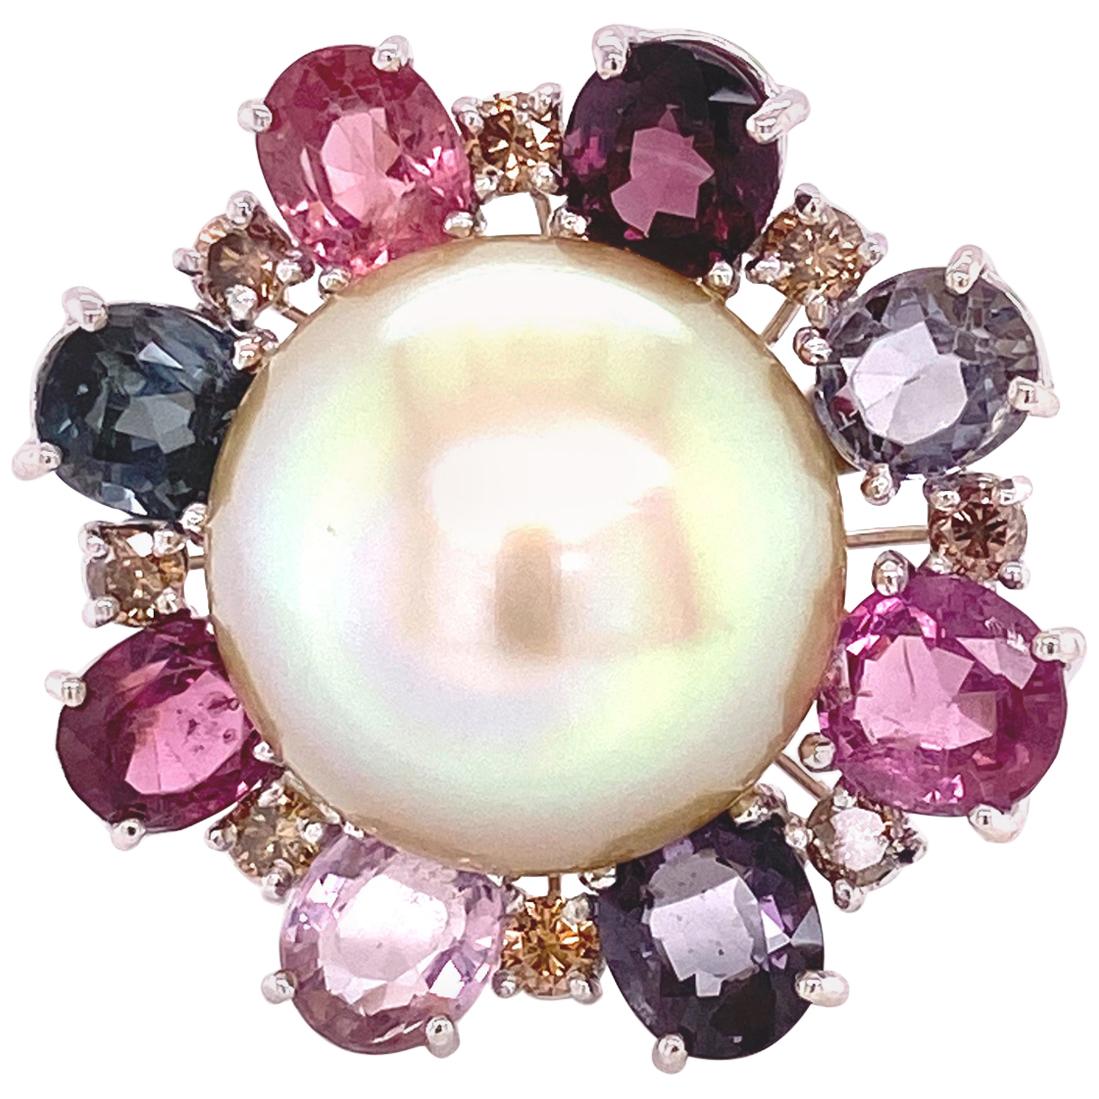 South Sea Golden Pearl, Burmese Multicoloured Spinel, and Brown Diamond Gold Ring:

A beautiful and elegant ring, it features a large and rare golden South Sea pearl in the centre, with a halo of natural no heat Burmese multi-coloured spinels and